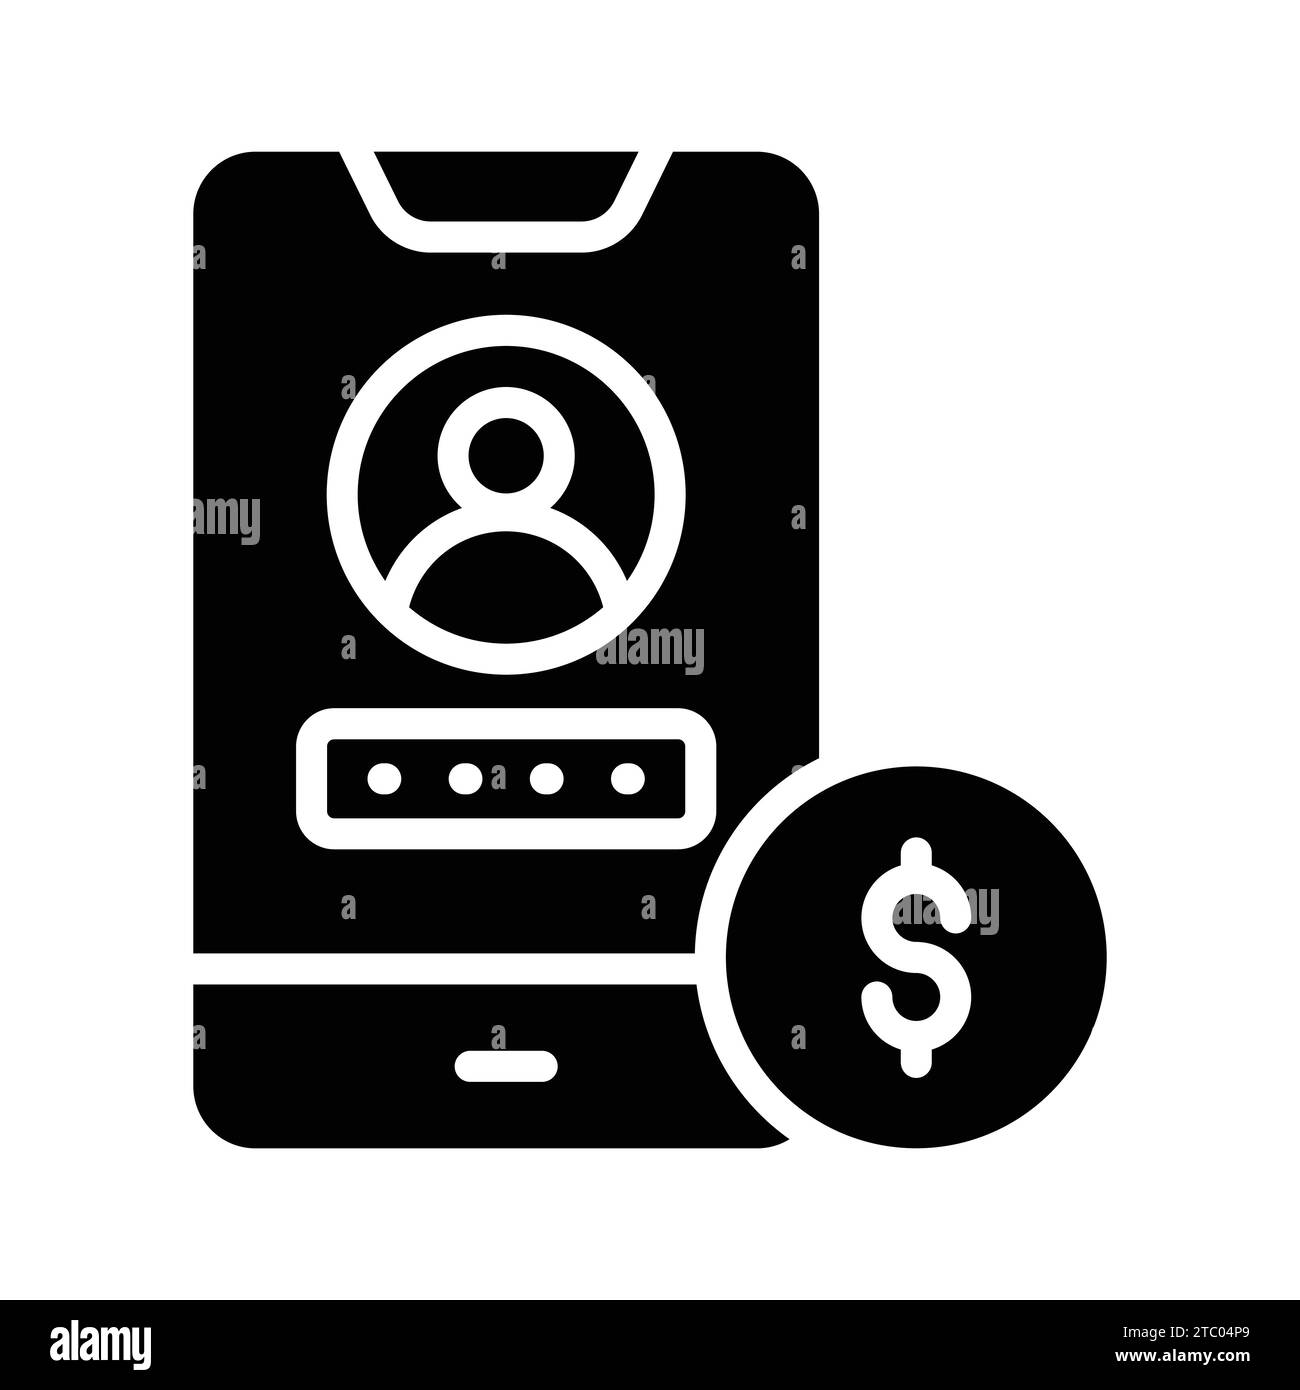 User and password inside mobile with dollar denoting concept icon of banking app, ready for premium use. Stock Vector